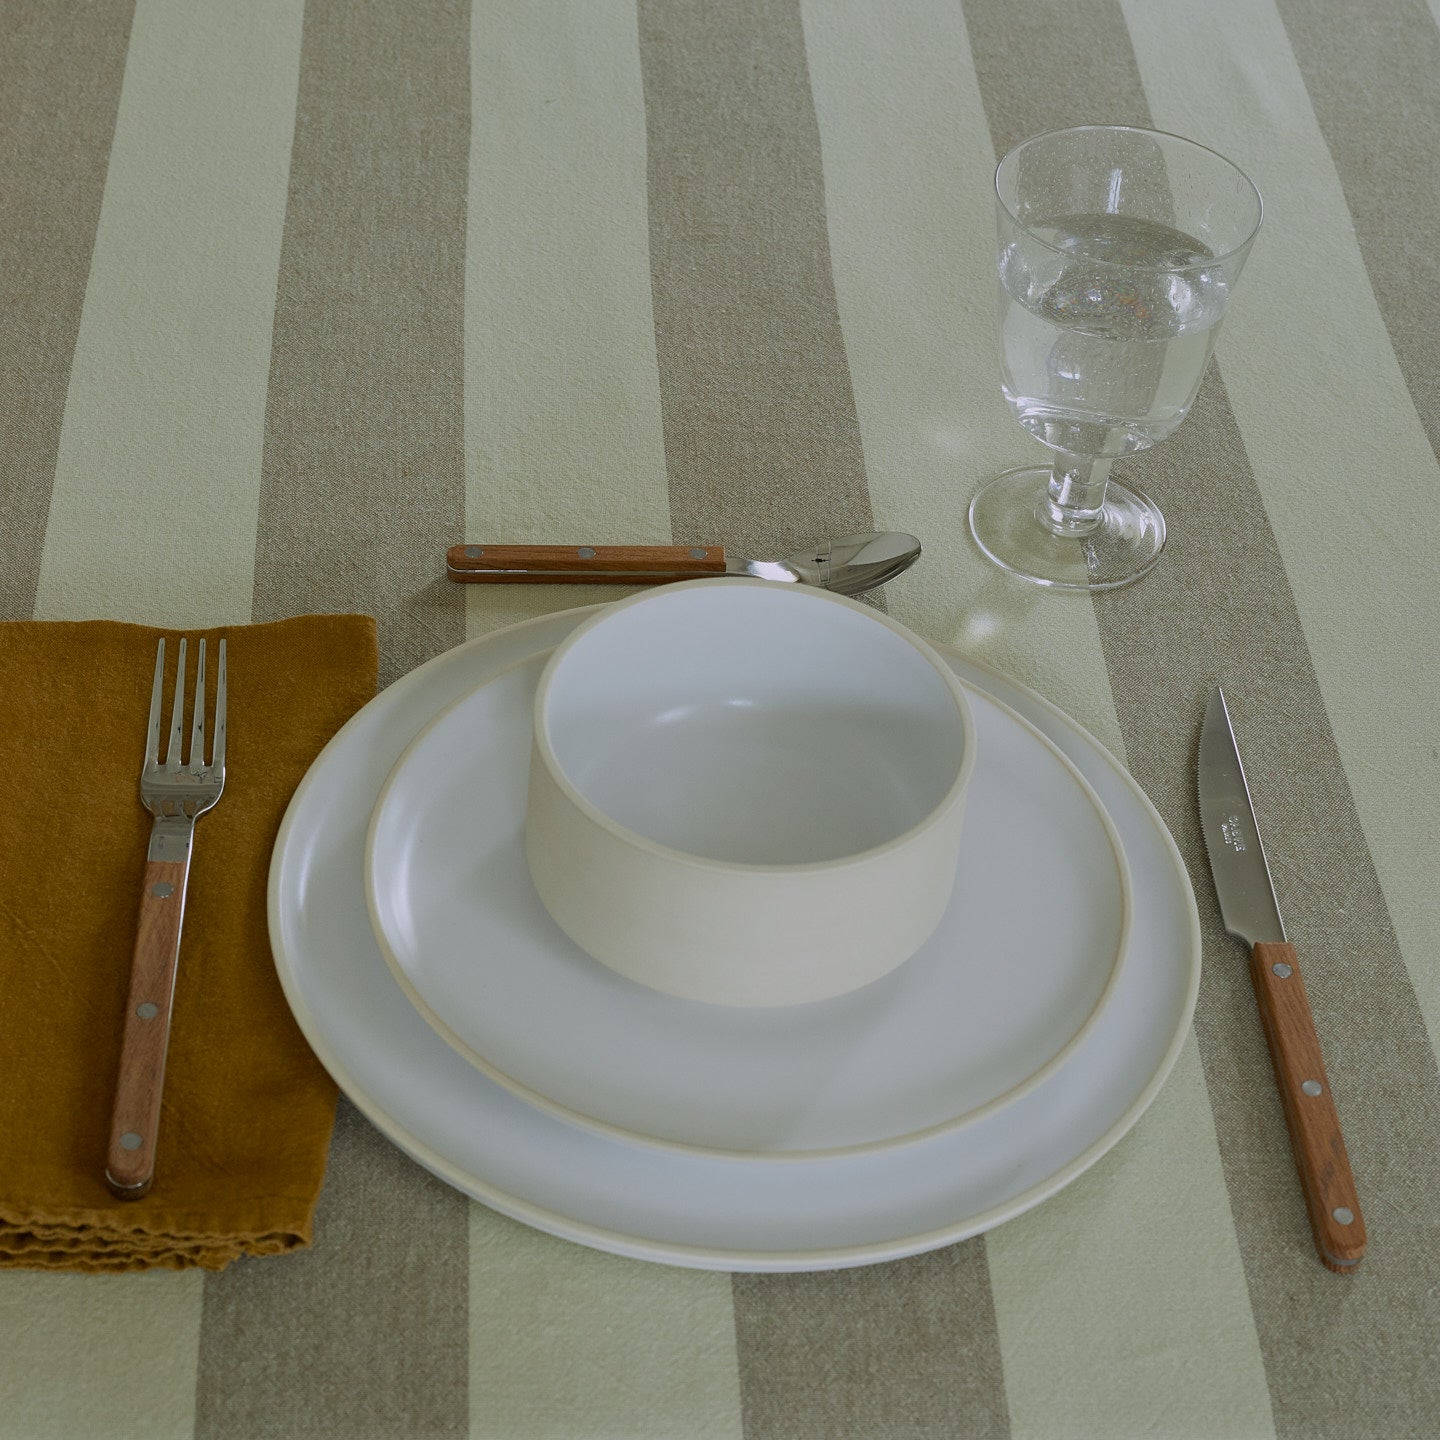 Placesetting with Modernist Cereal Bowl on ivory striped tablecloth.